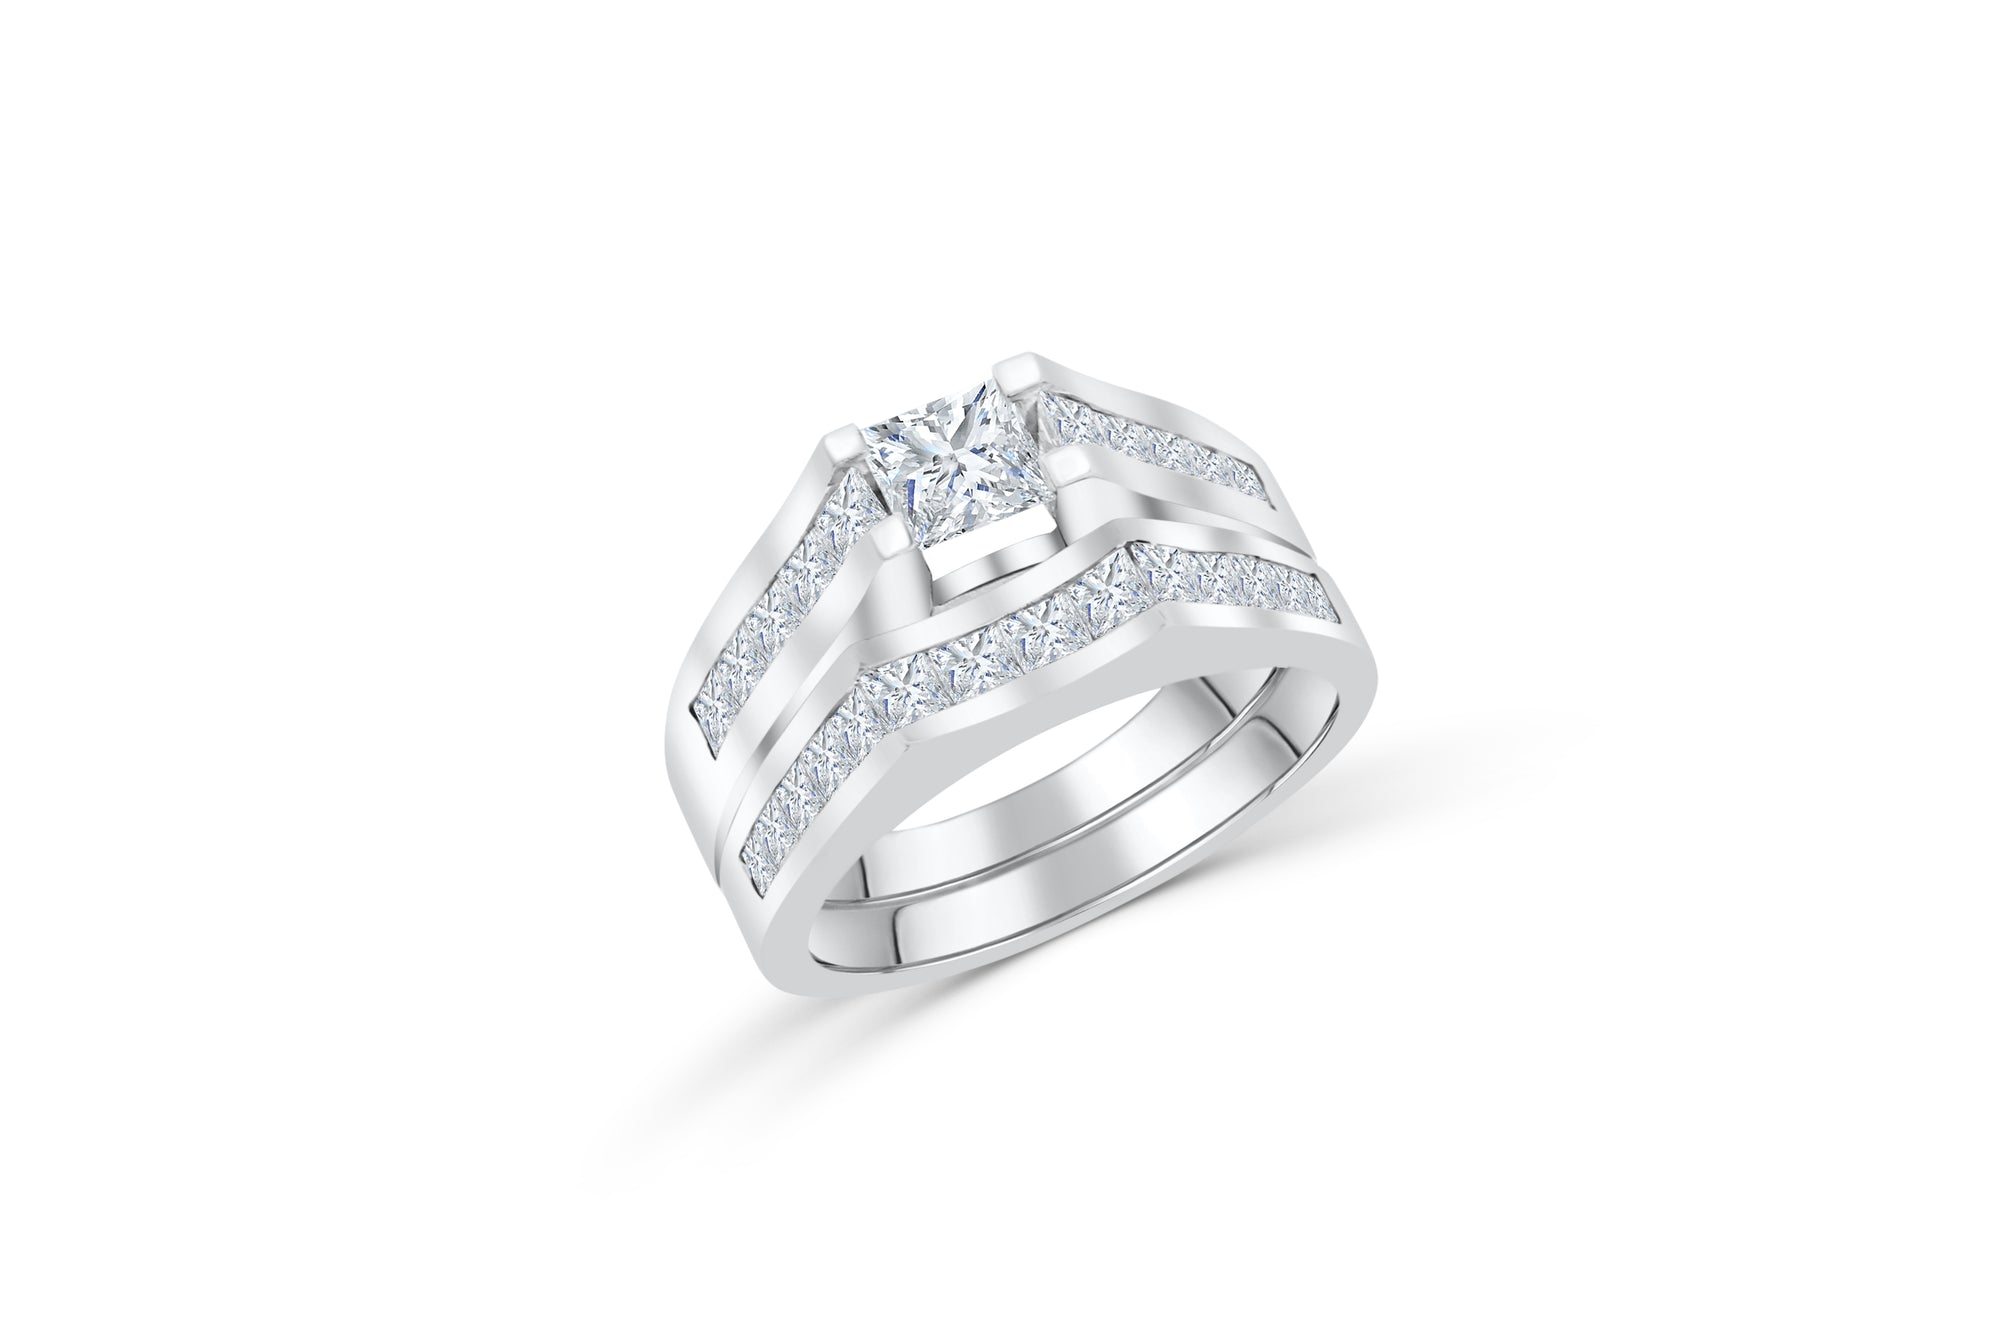 Flat Top Diamond Engagement Ring Set 2.54 ct tw 14K White Gold DENG040 - NorthandSouthJewelry